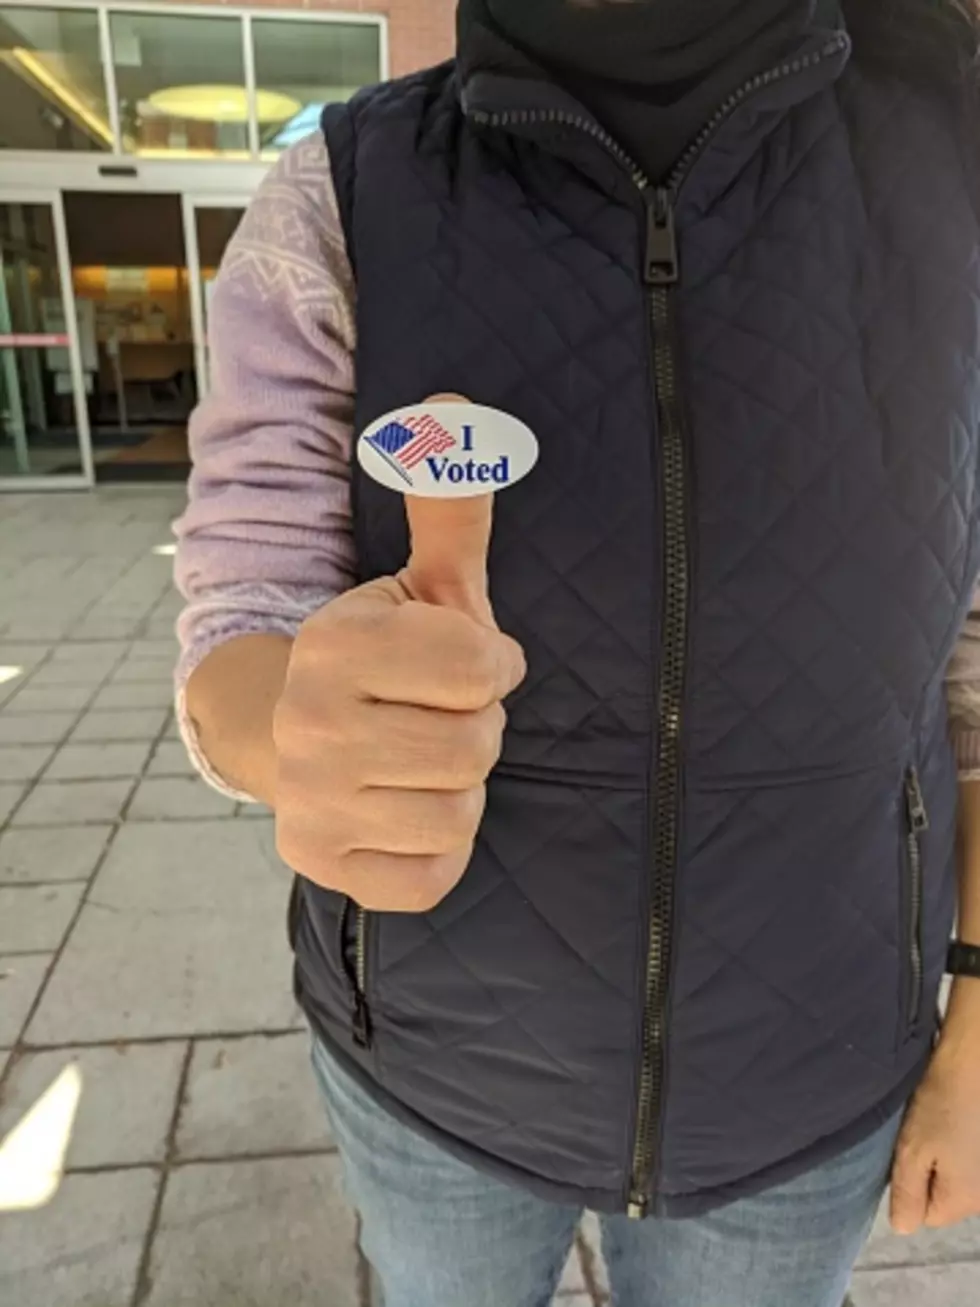 Dedicated Dude From Mass Drove to Georgia to Vote When His Absentee Ballot Didn’t Arrive